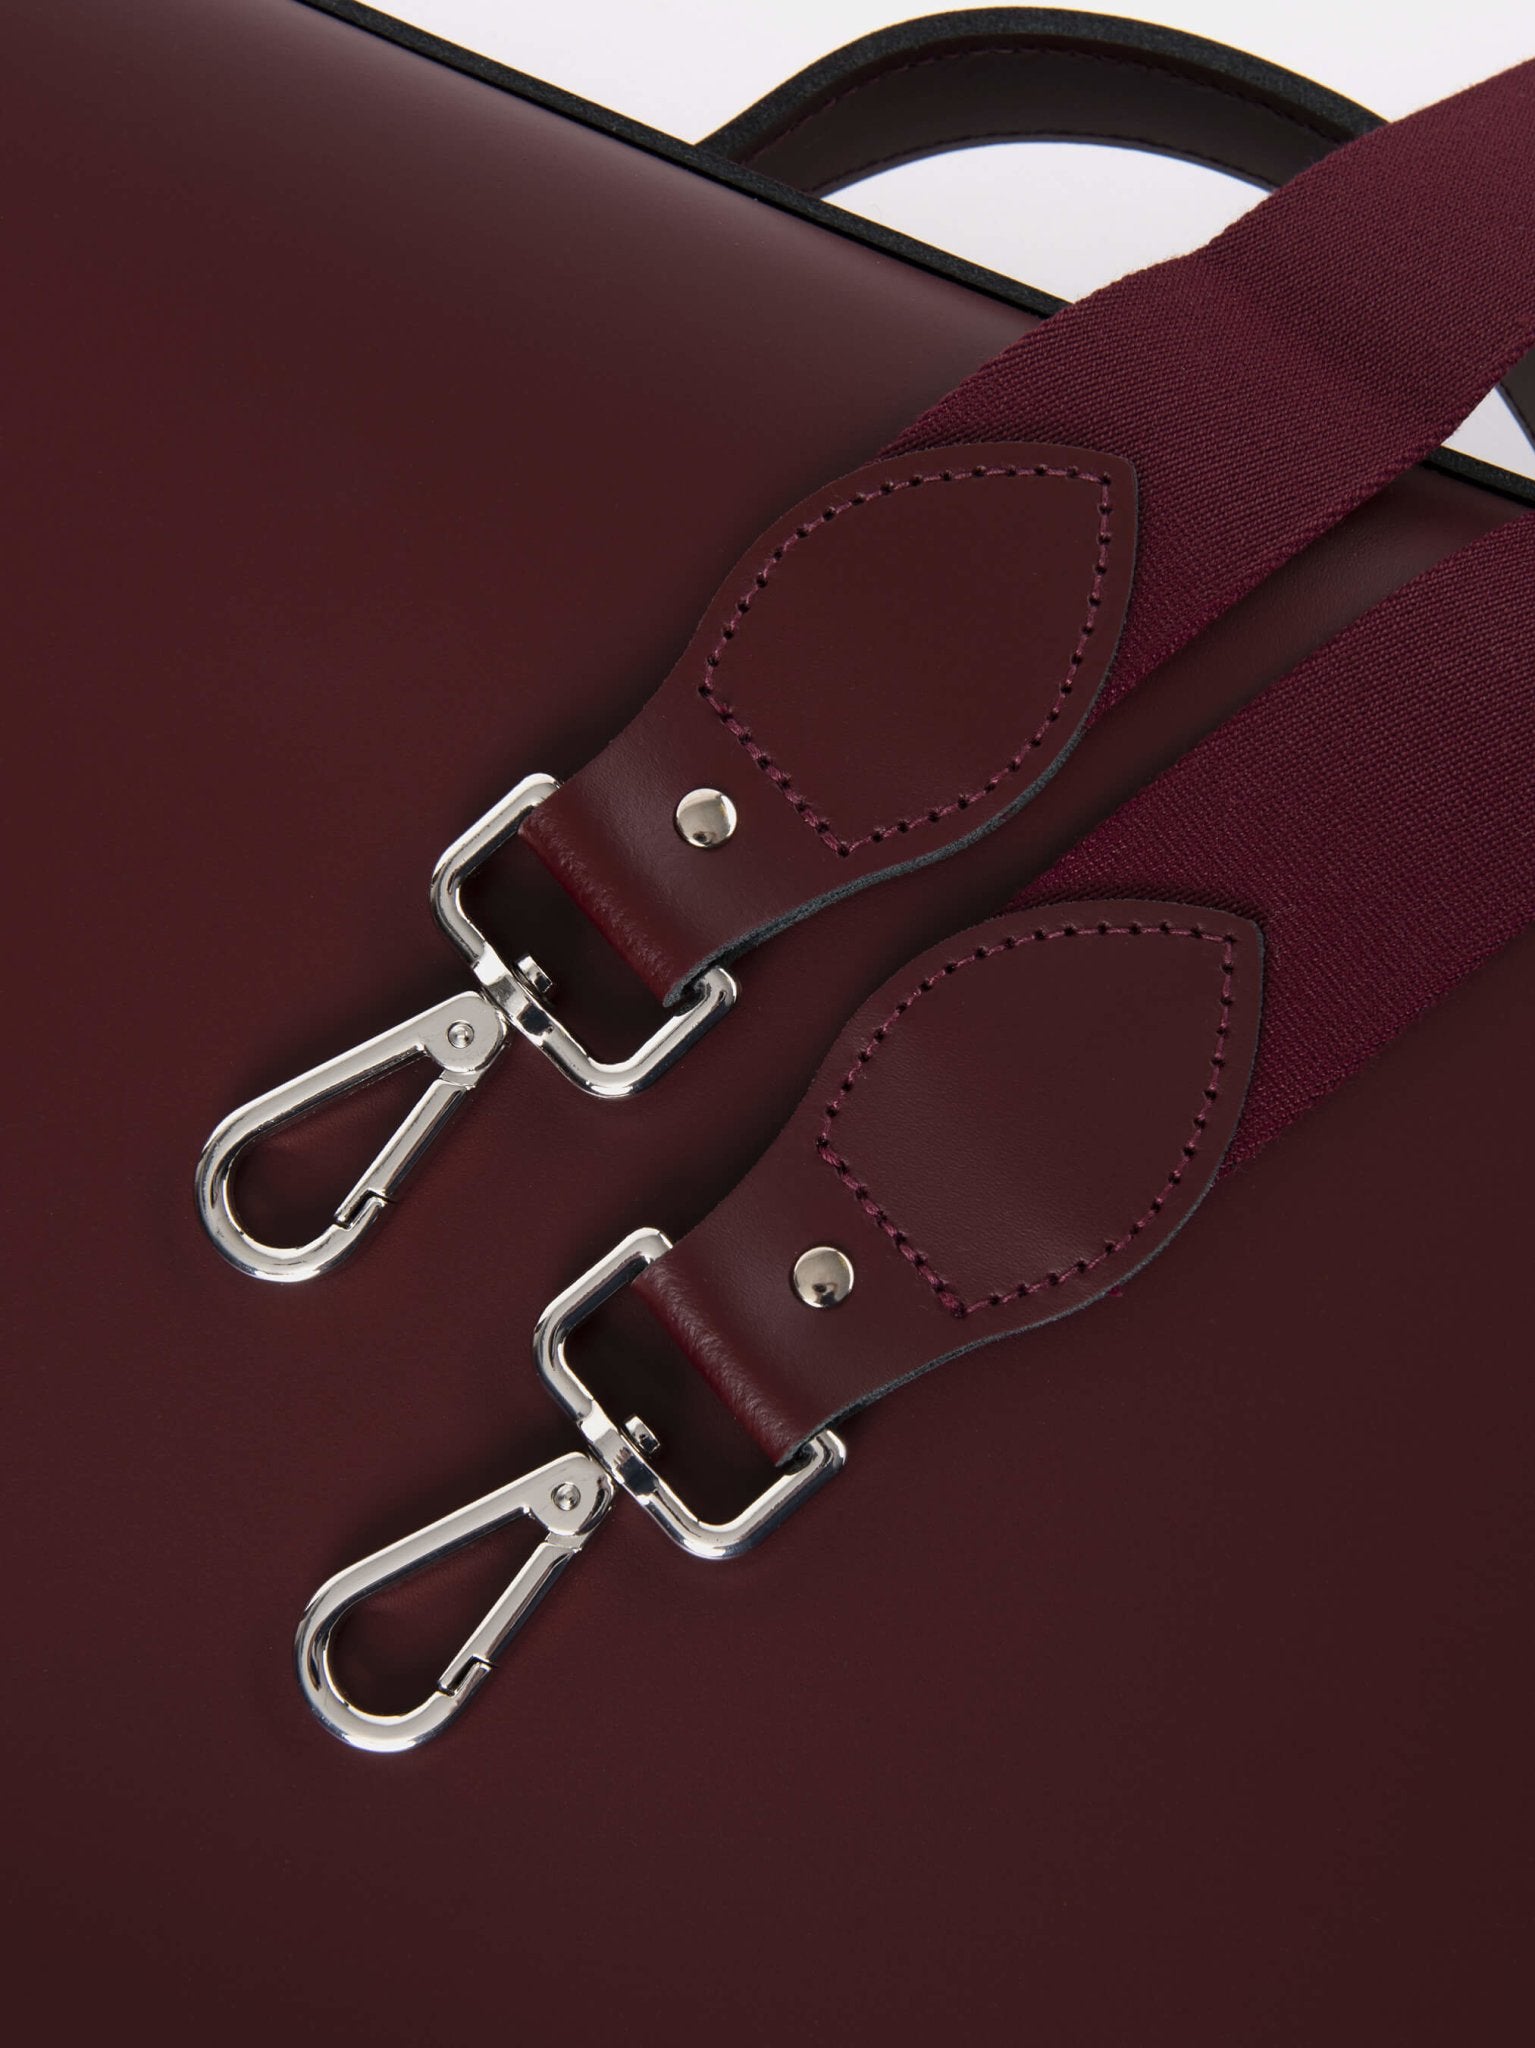 The 16.5 Inch Batchel - Oxblood with Webbing Strap - The Cambridge Satchel Co.